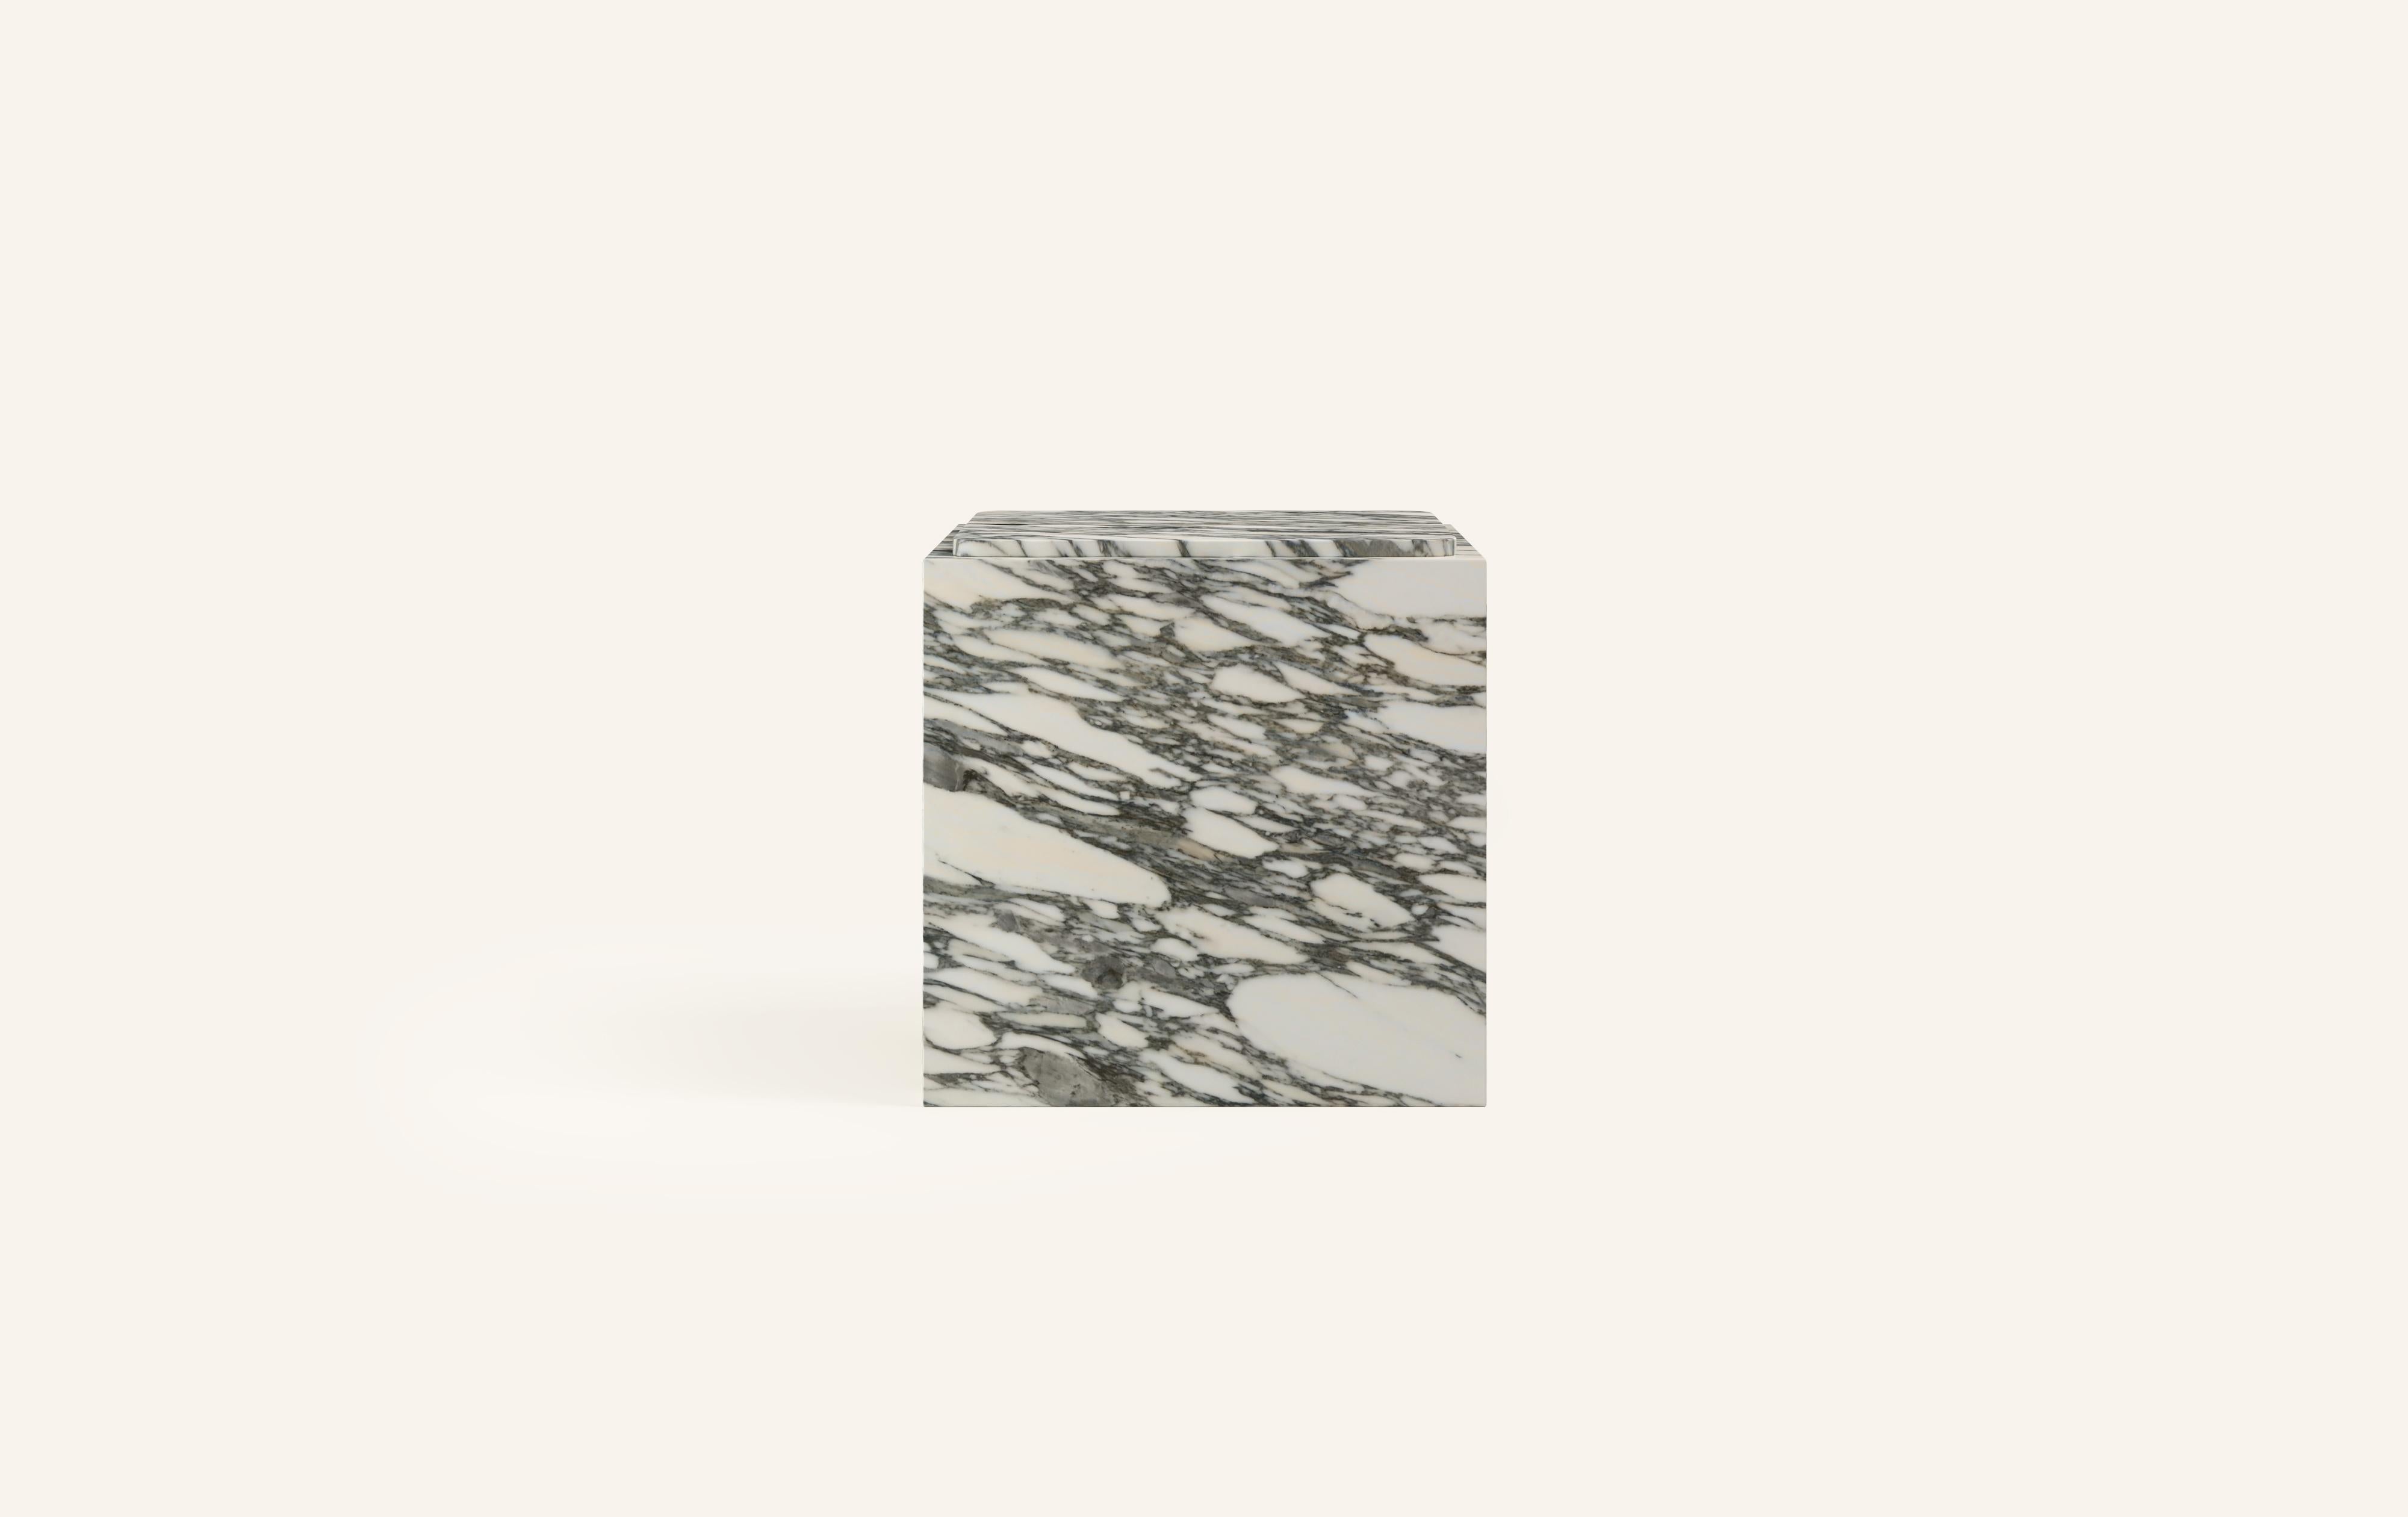 MONOLITHIC FORMS SOFTENED BY GENTLE EDGES. WITH ITS BOLD MARBLE PATTERNS CUBO IS AS VERSATILE AS IT IS STRIKING.

DIMENSIONS:
18”L x 18”W x 19”H: 
- 3/4